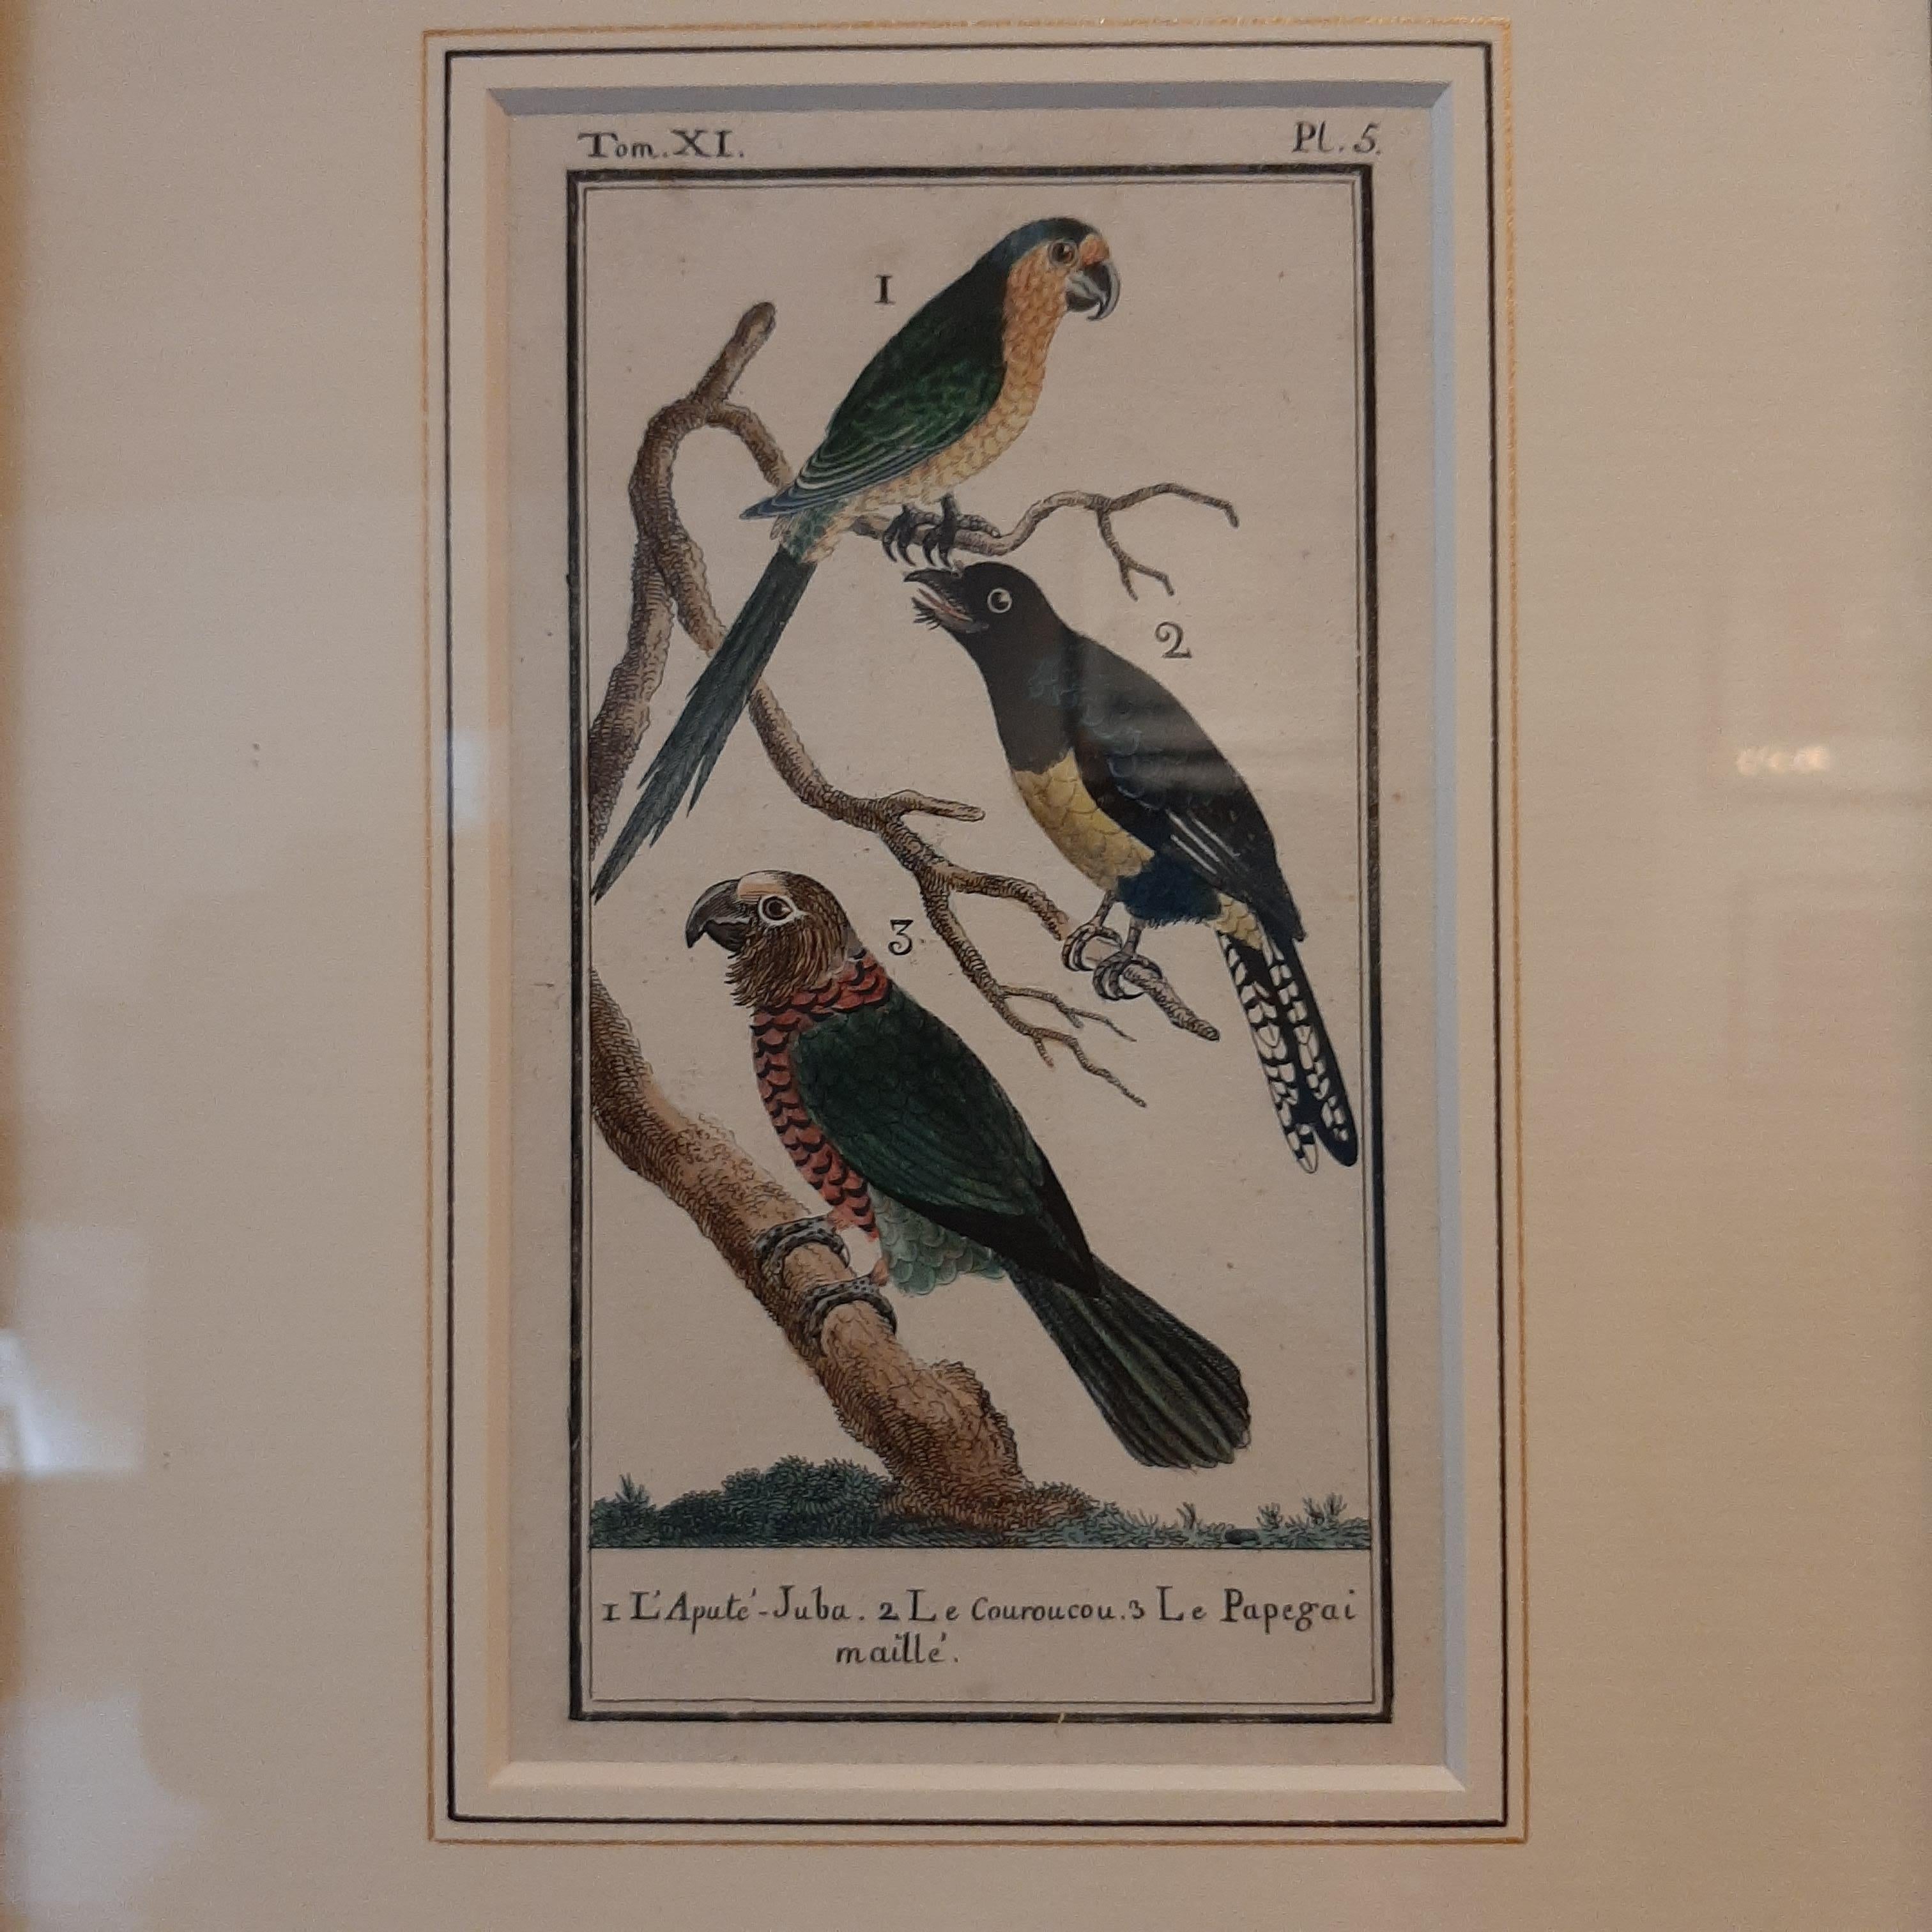 Antique print titled '1. l'Apute-Juba, 2. Le Couroucou, 3. Le Papegai Maille'. Hand-colored engraving of parrot species. This print originates from 'Histoire naturelle, generale et particuliere (..)' by Buffon. Published 1787.

Frame included. We